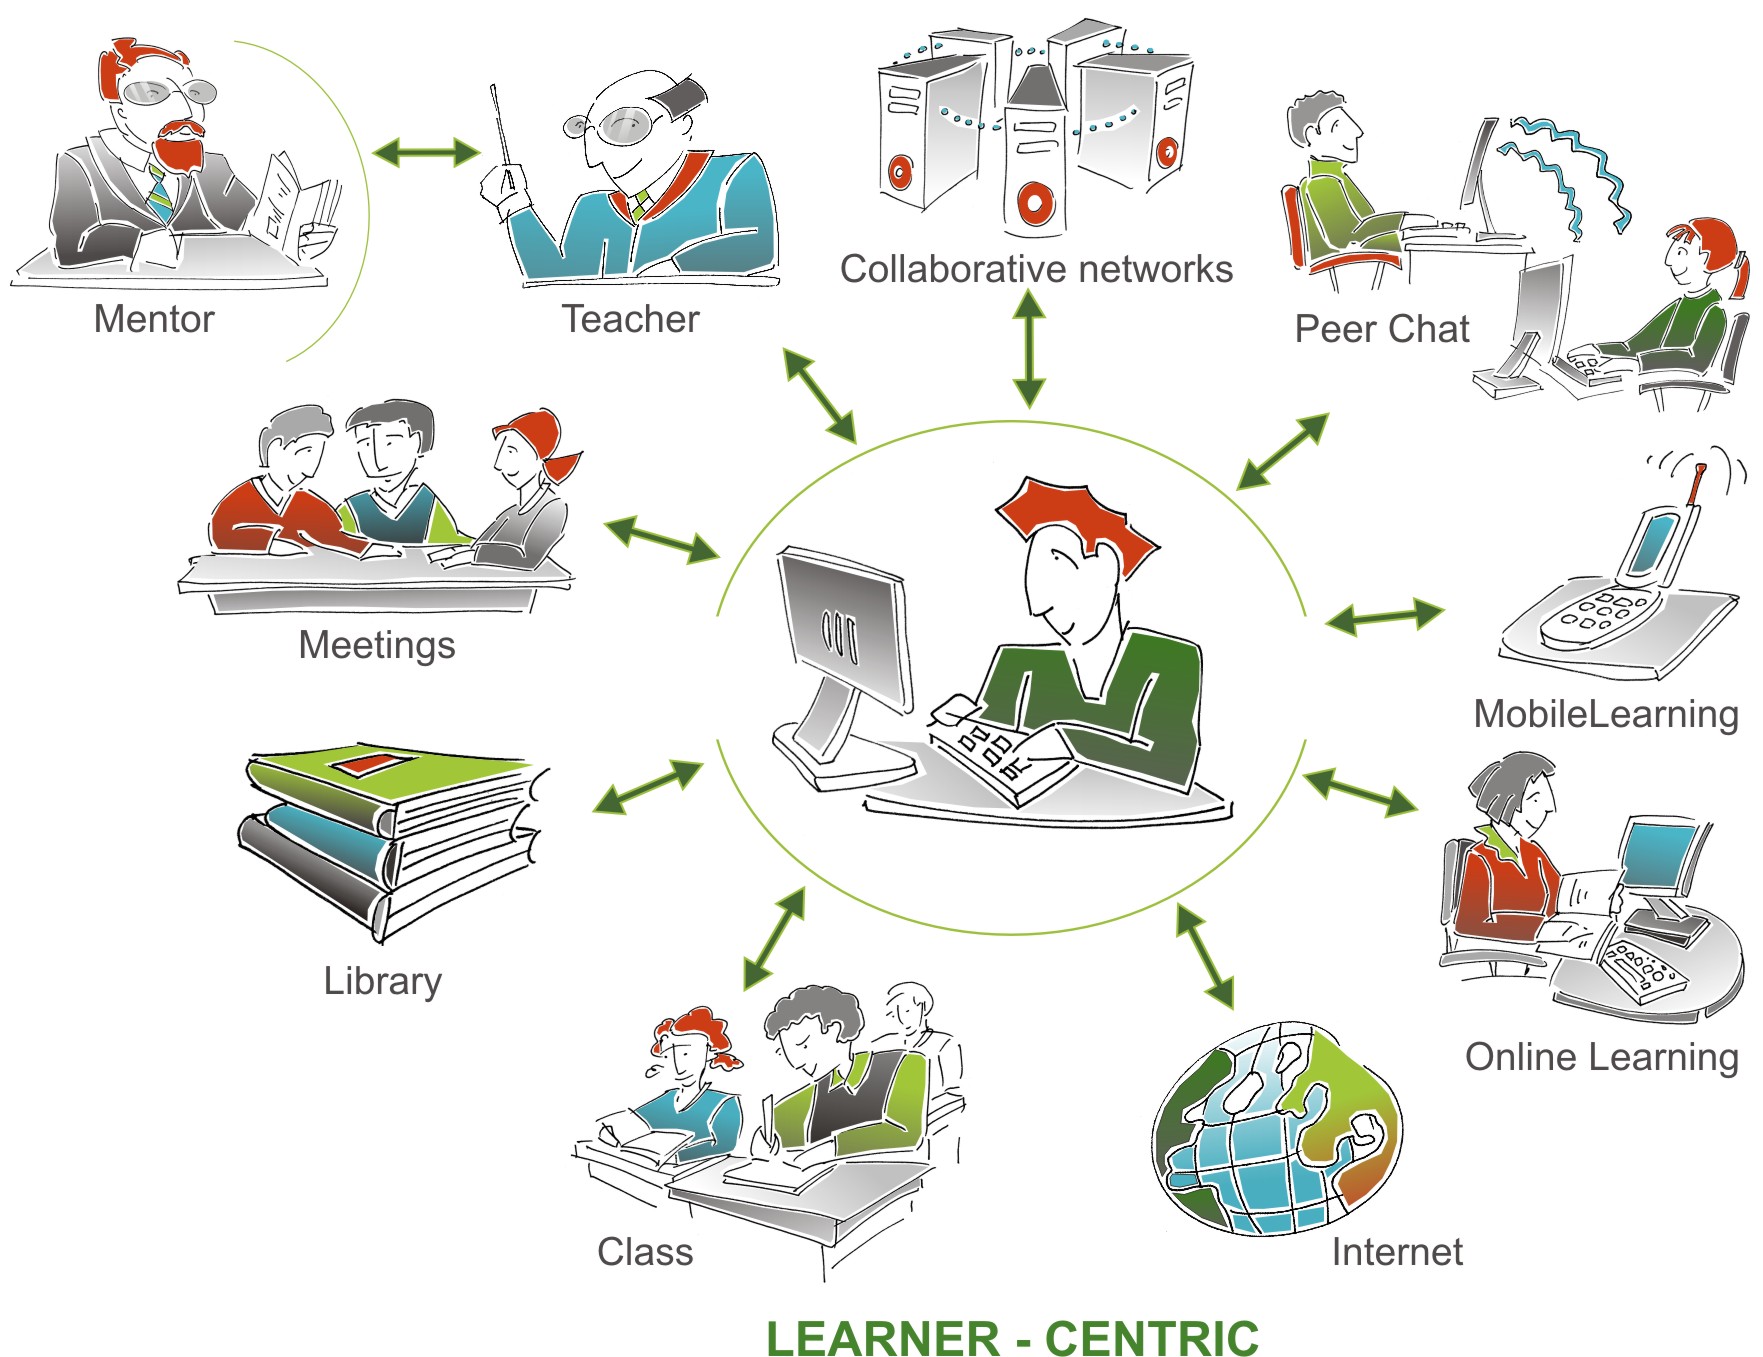 Why learner-centred?